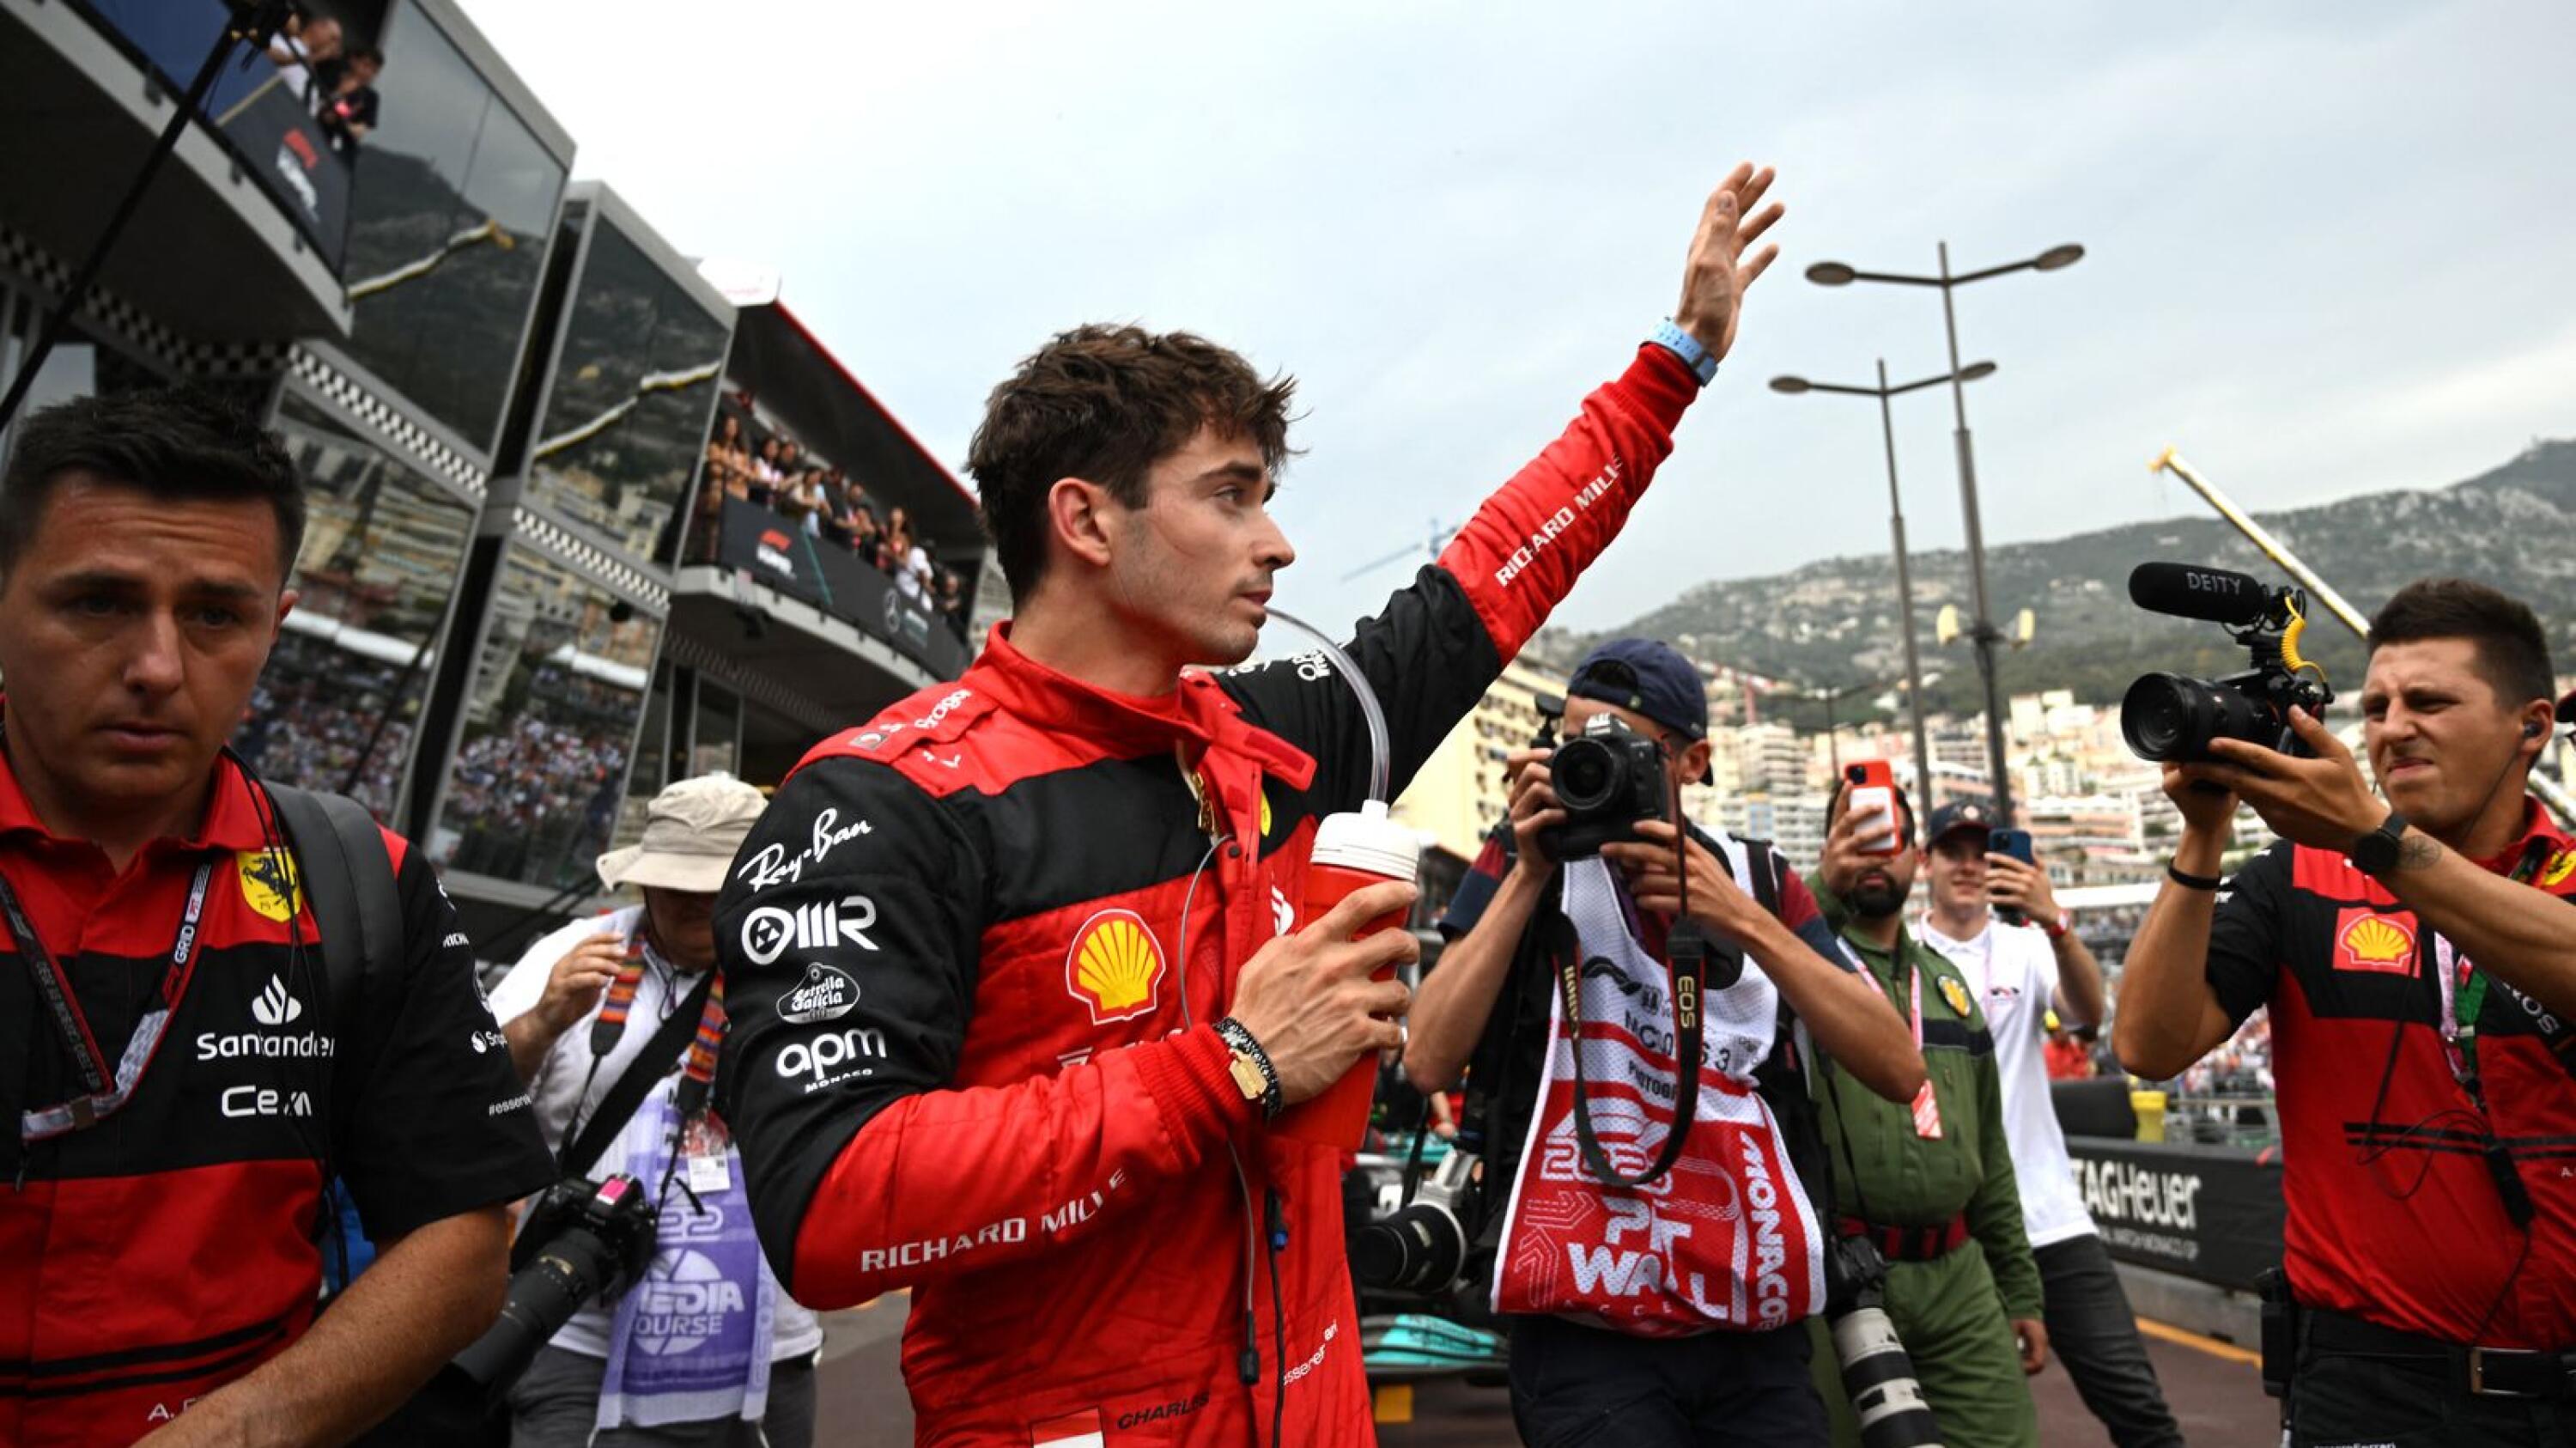 Ferrari's Monegasque driver Charles Leclerc waves in the pit area after the qualifying  session at the Monaco street circuit in Monaco, ahead of the Monaco Formula 1 Grand Prix, on Saturday